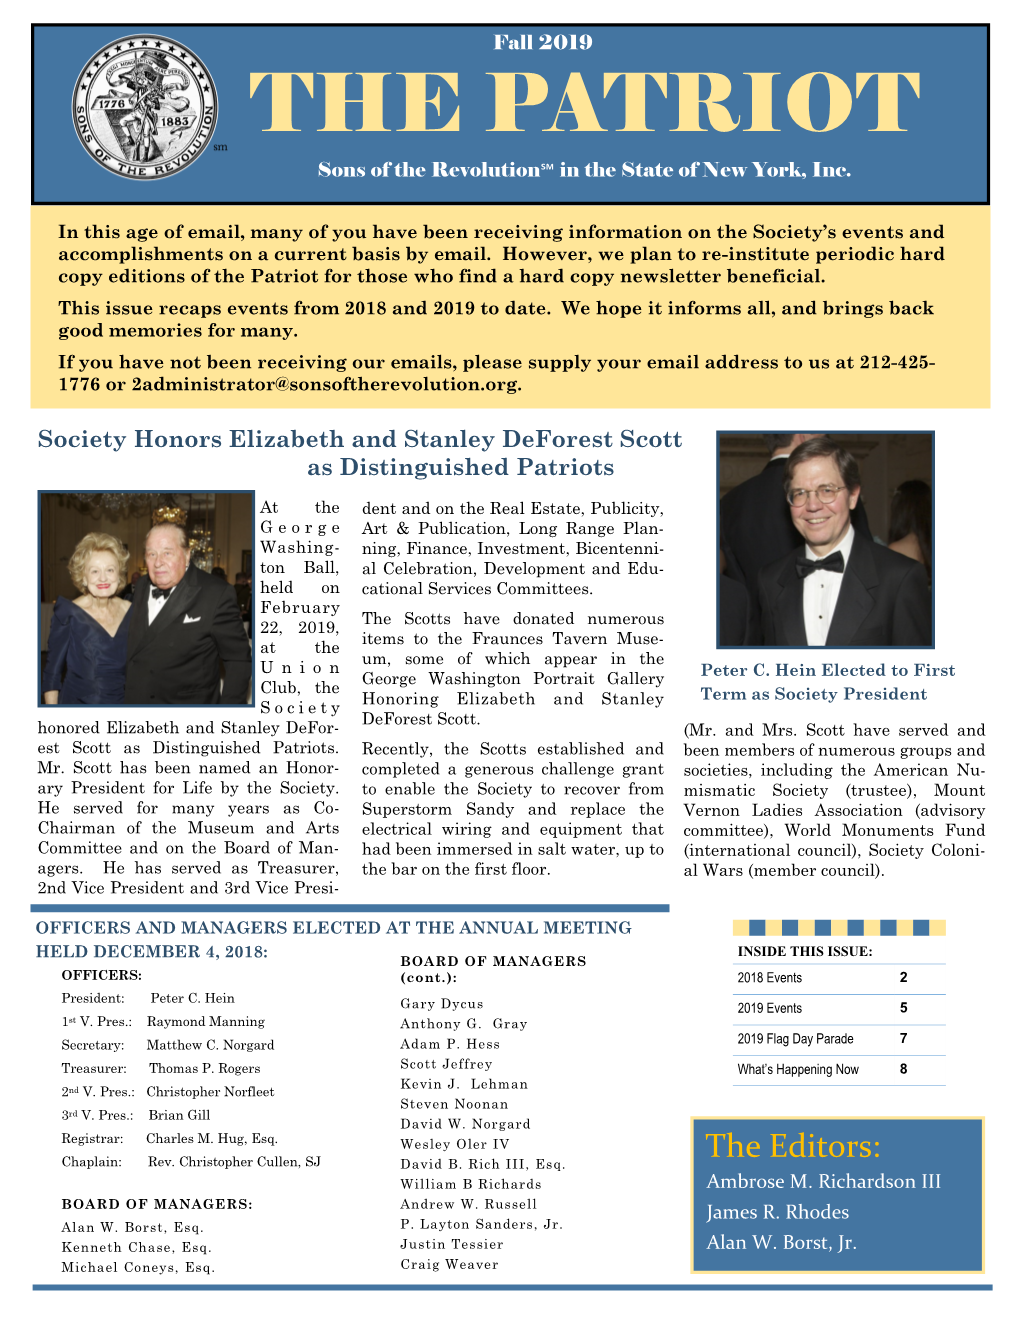 The Patriot Newsletter of the SRNY